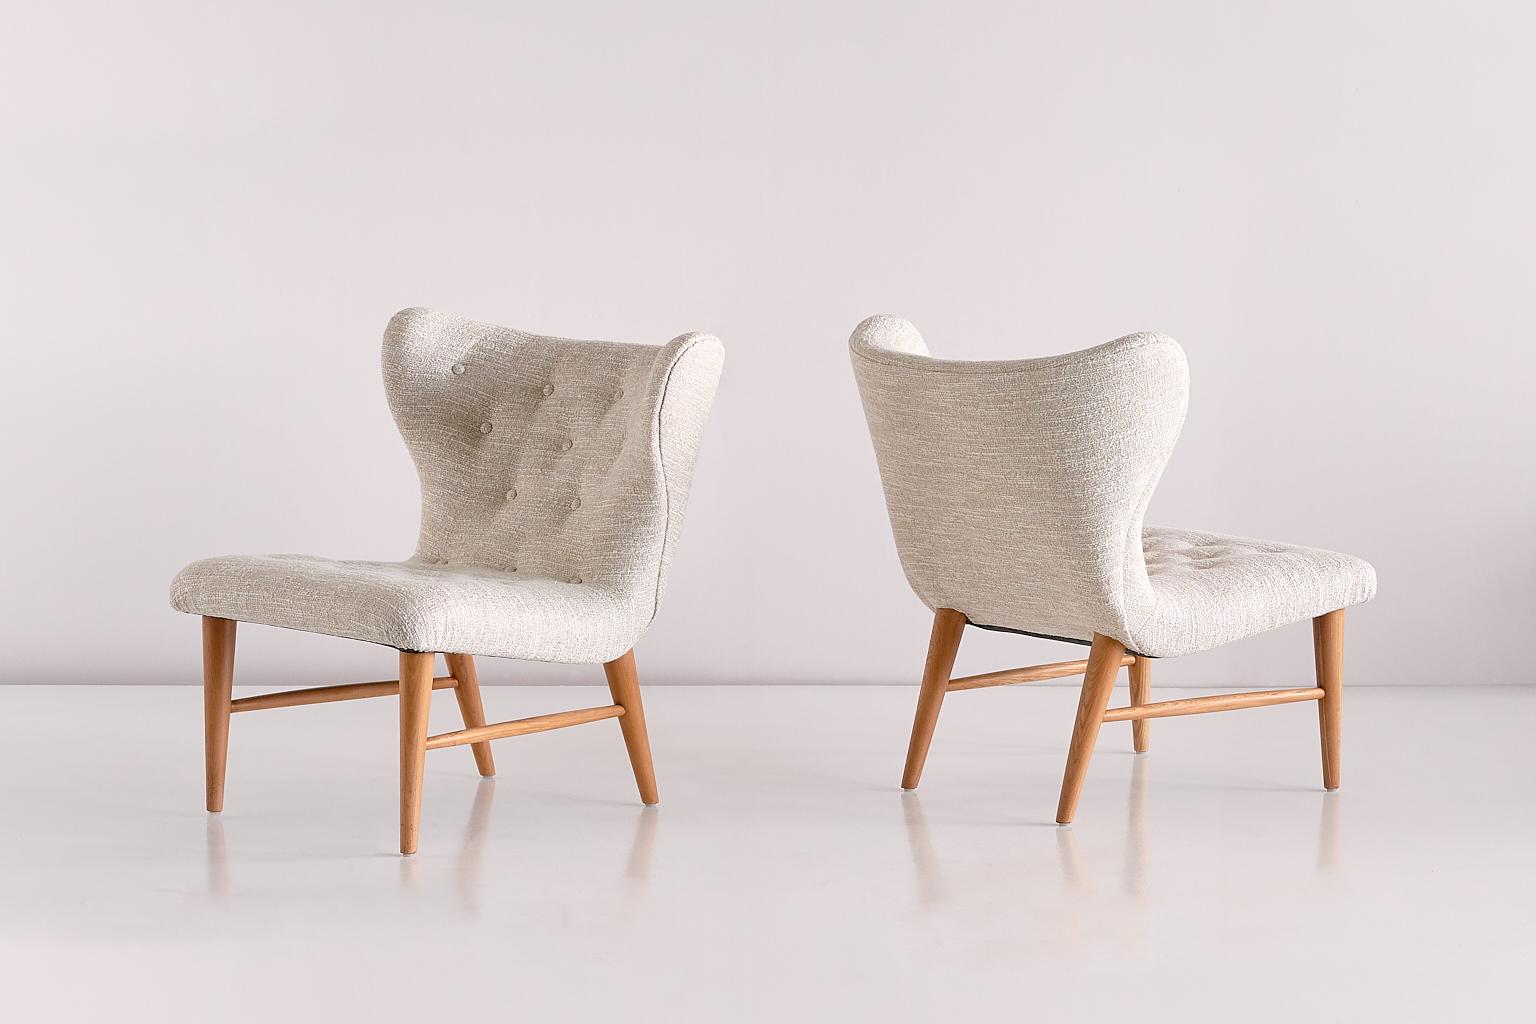 This rare pair of lounge chairs was designed by Eric Bertil Karlén and produced by his company Firma Rumsinteriör in Sweden in the 1940s. The elegant shape of the design is emphasized by the buttoned wing shaped back and seat. The elm wood frame